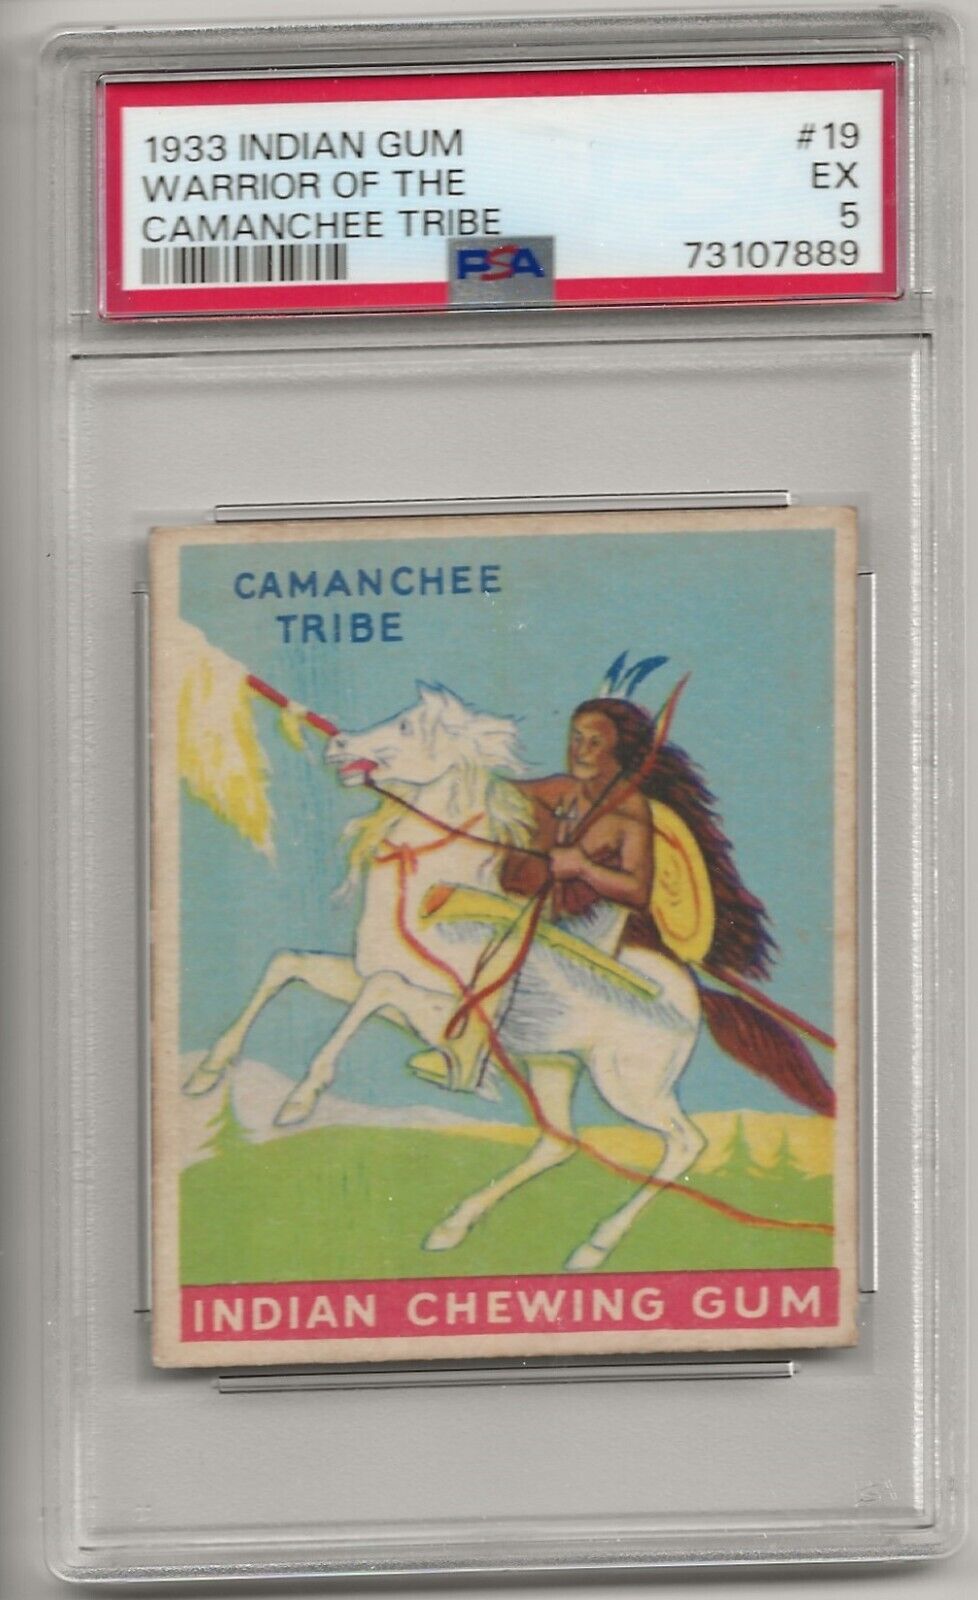 1933 INDIAN GUM #19 (96) WARRIOR OF THE CAMANCHEE TRIBE, PSA 5